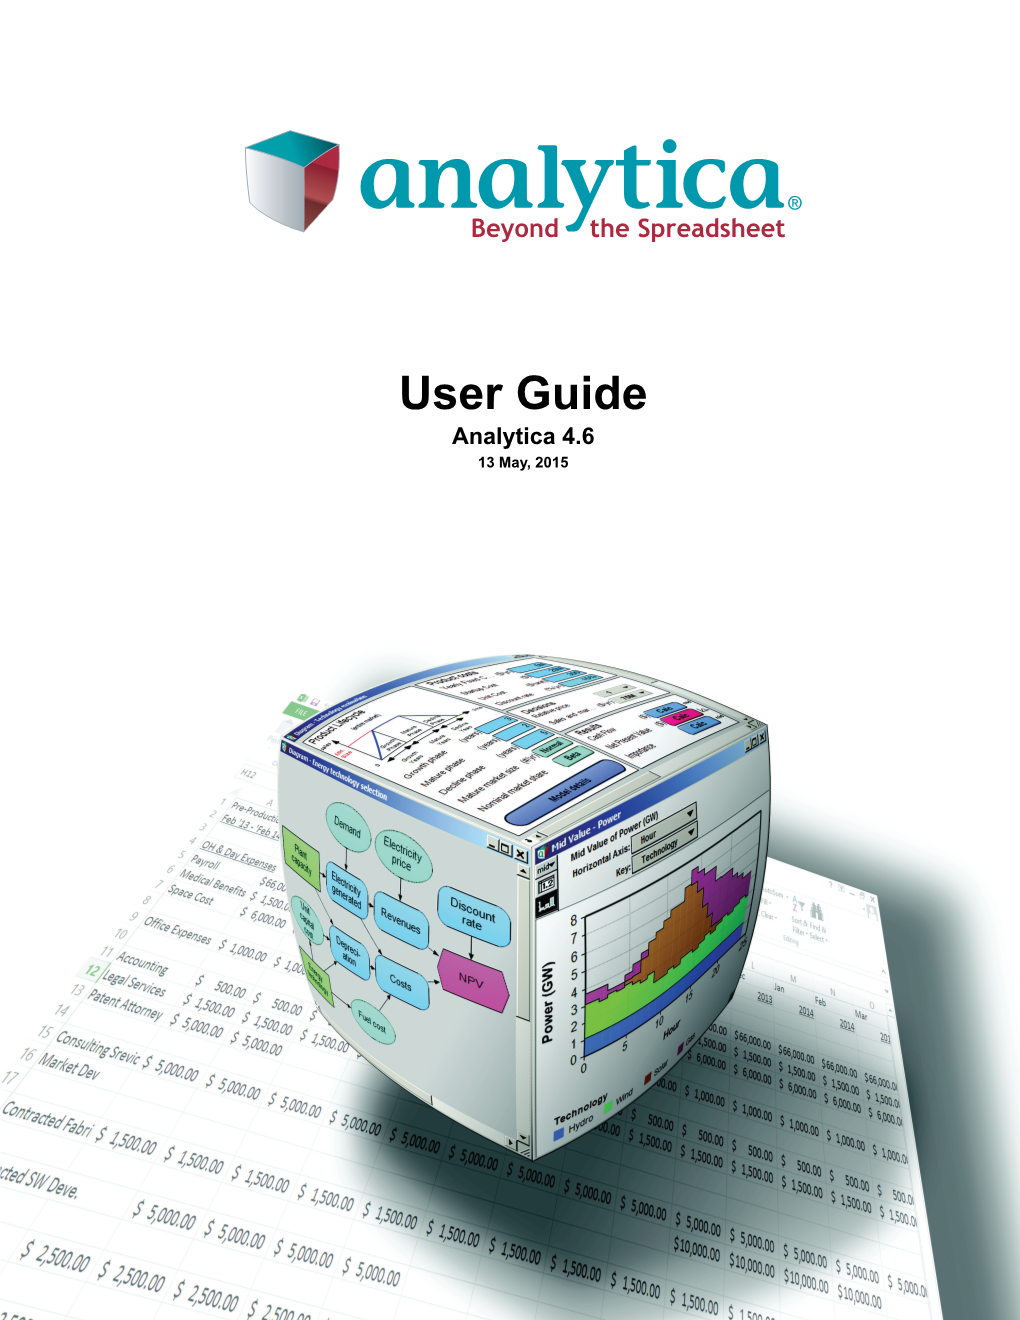 User Guide Analytica 4.6 13 May, 2015 Lumina Decision Systems, Inc